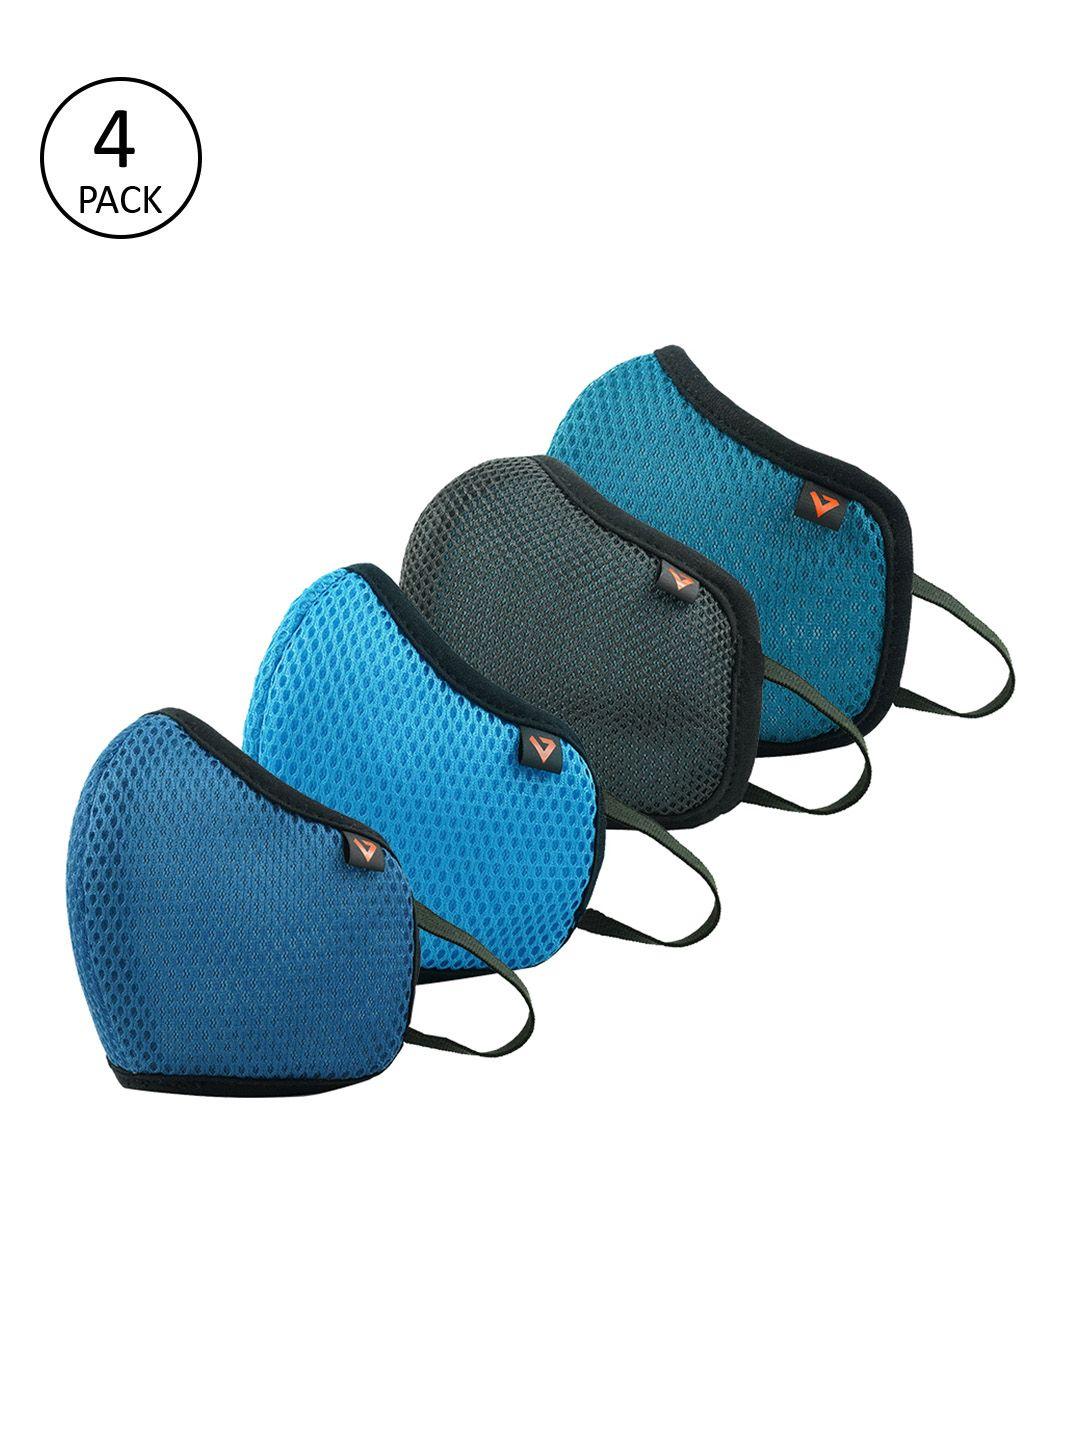 THe VerTicaL Unisex 5 Pcs 4 Ply Reusable Protective Outdoor Masks